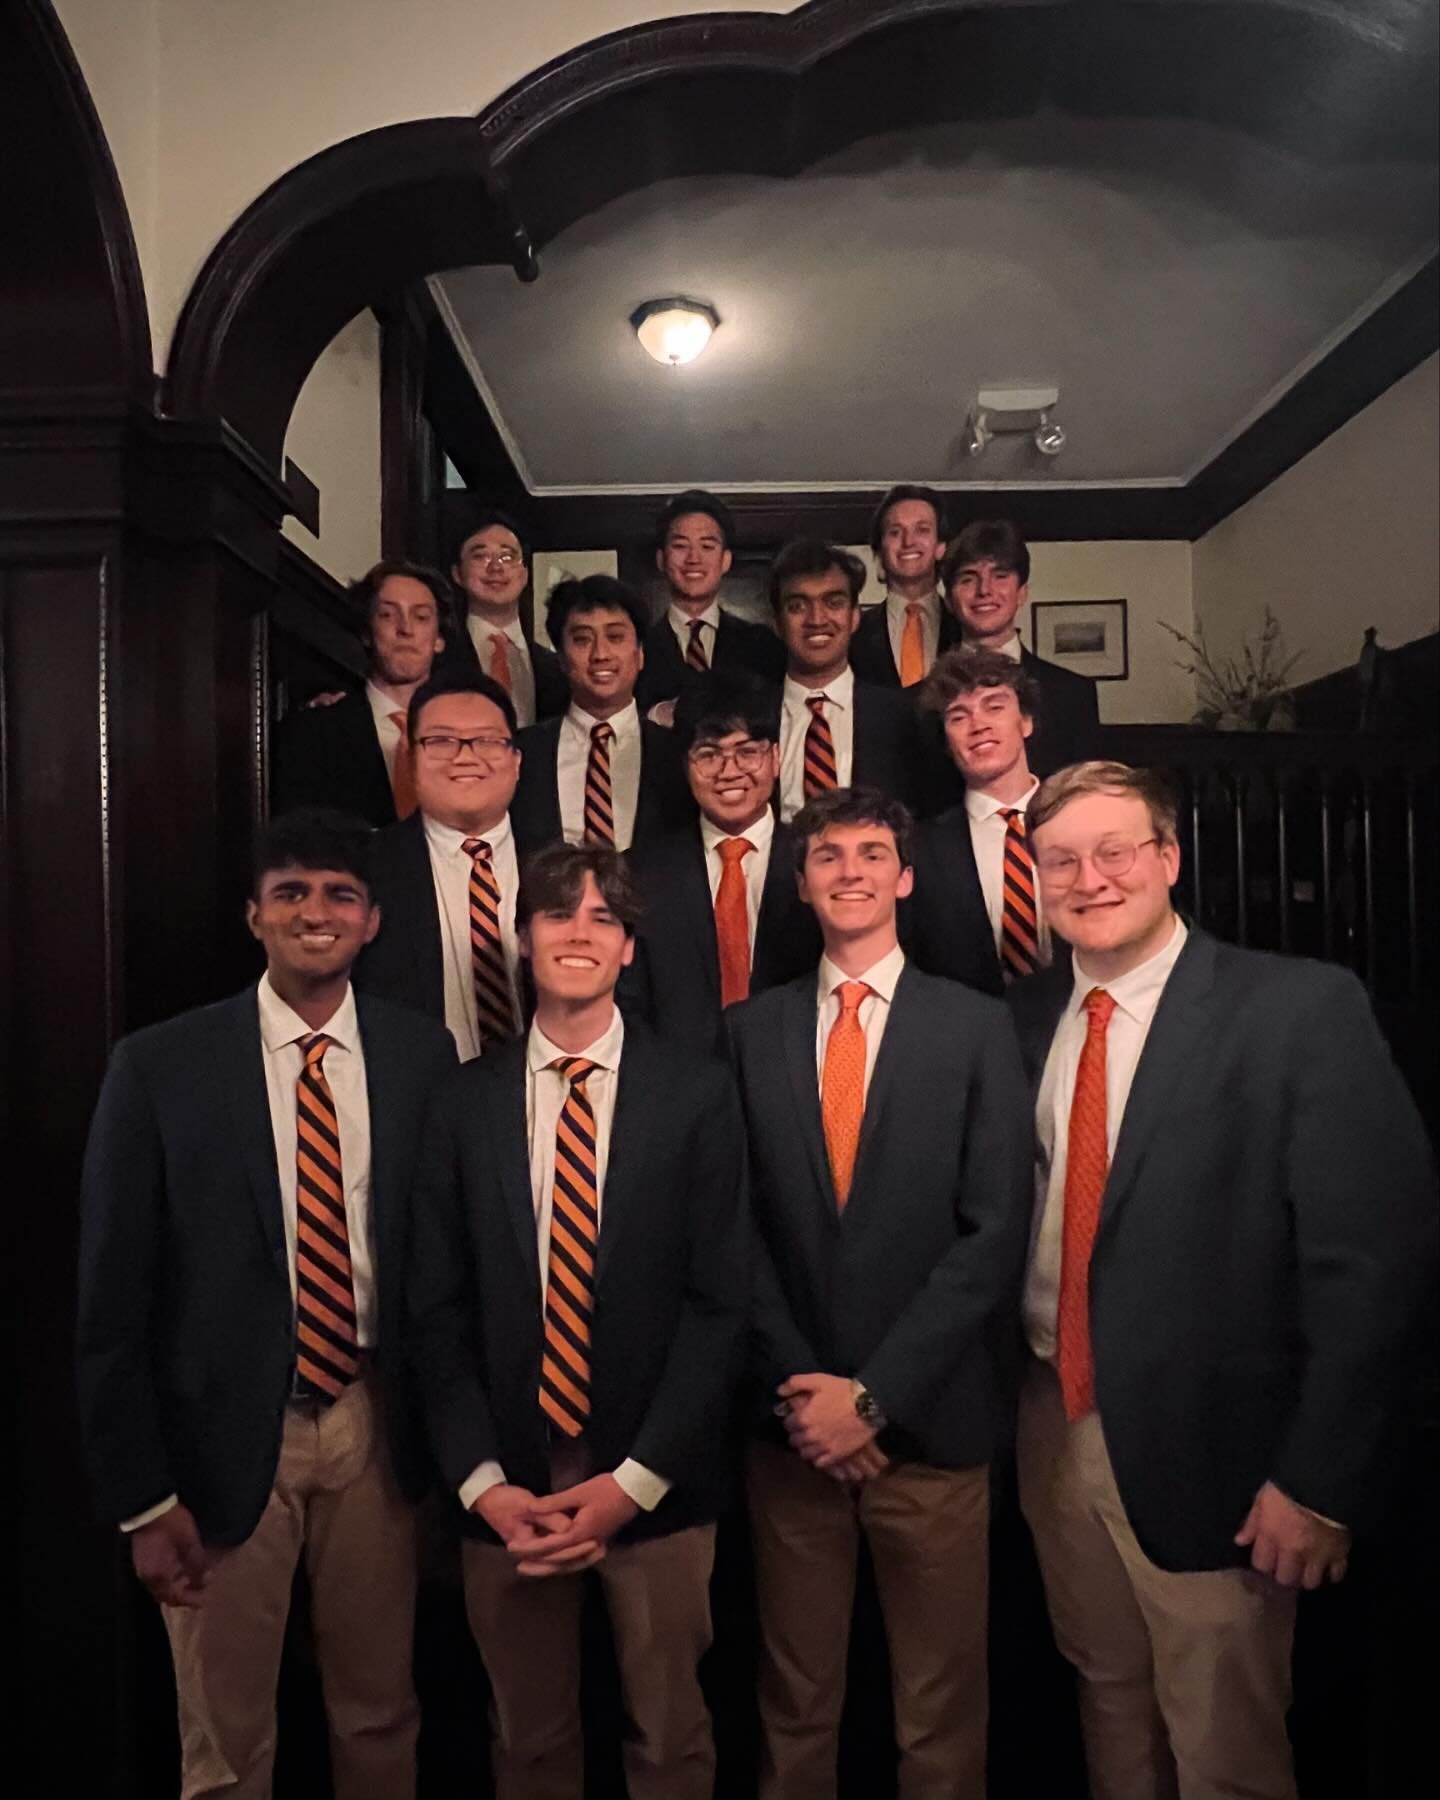 The Tones have made their appearance at the Montauk Club of Brooklyn, an annual tradition dating back to 1971! As our last show of the semester, we are delighted to have put on a performance of both our classical repertoire and newer arrangements. Fo